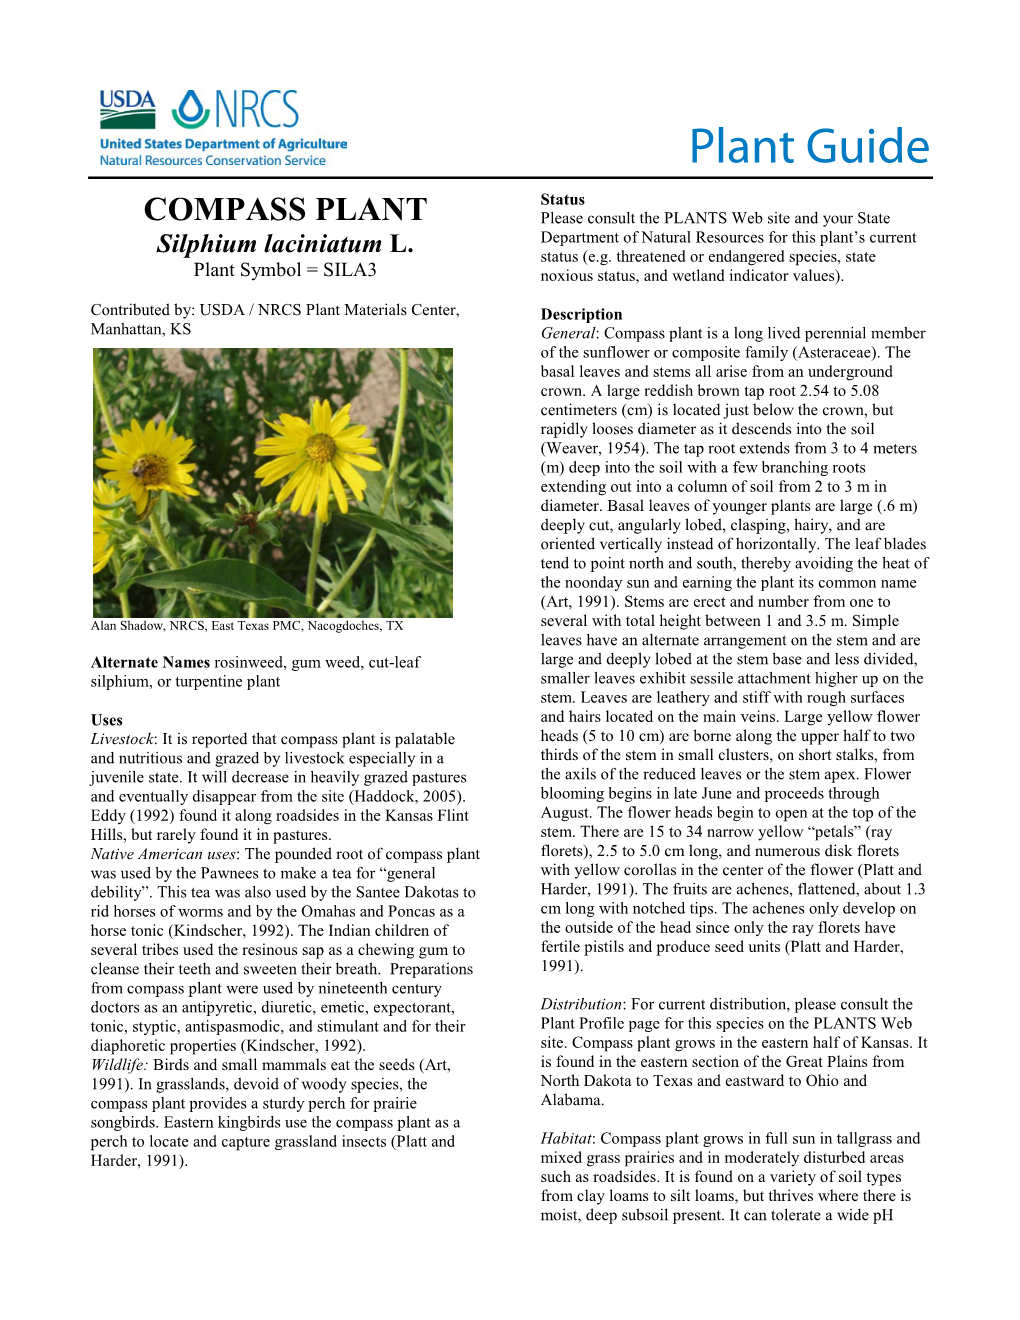 COMPASS PLANT Please Consult the PLANTS Web Site and Your State Department of Natural Resources for This Plant’S Current Silphium Laciniatum L